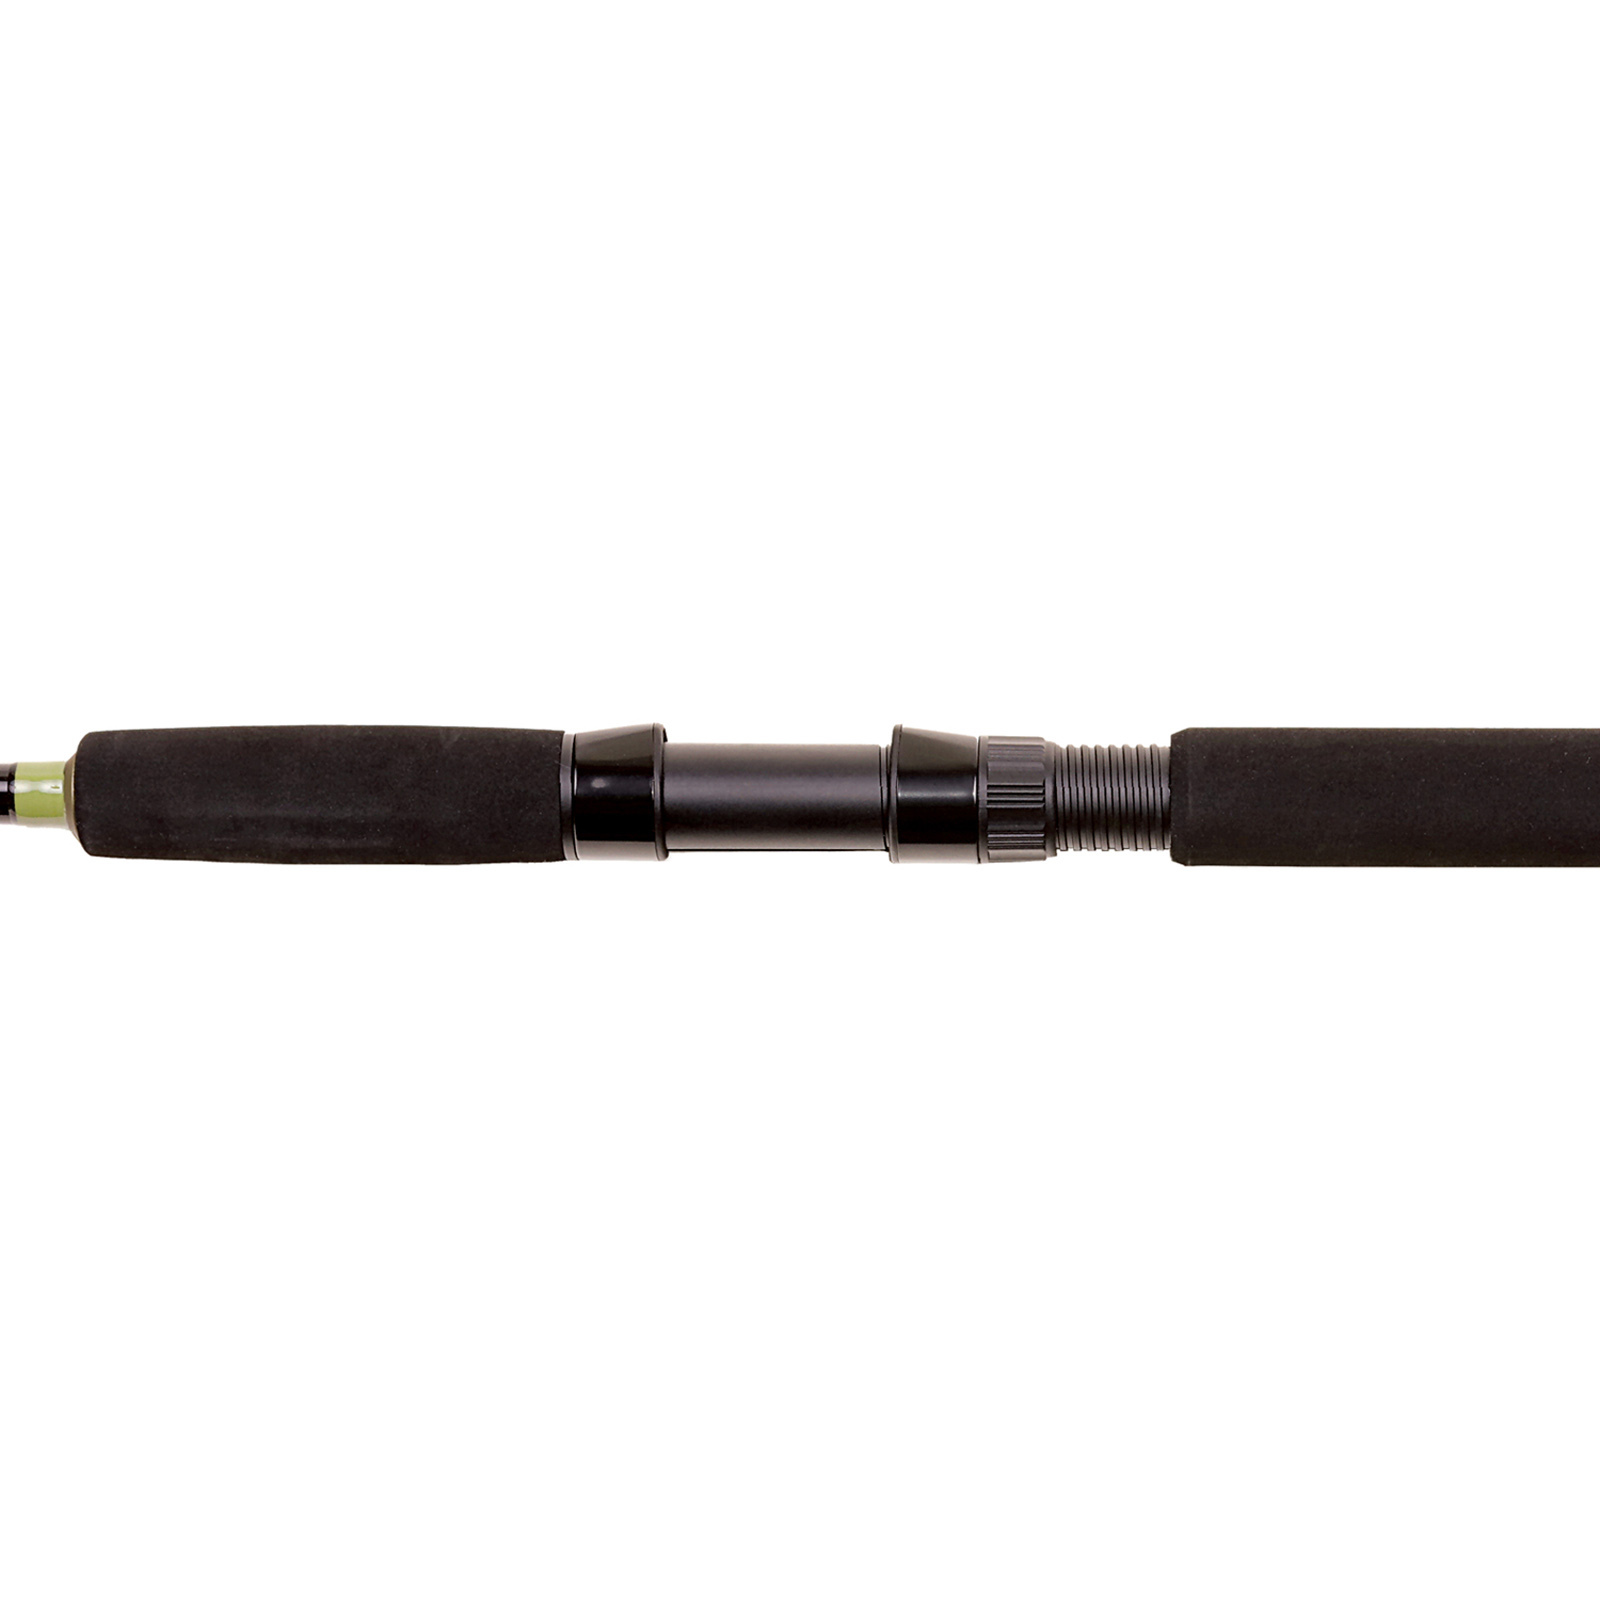 Eagle Claw Cat Claw 2 - Spinning Catfish Rod , Up to $6.00 Off